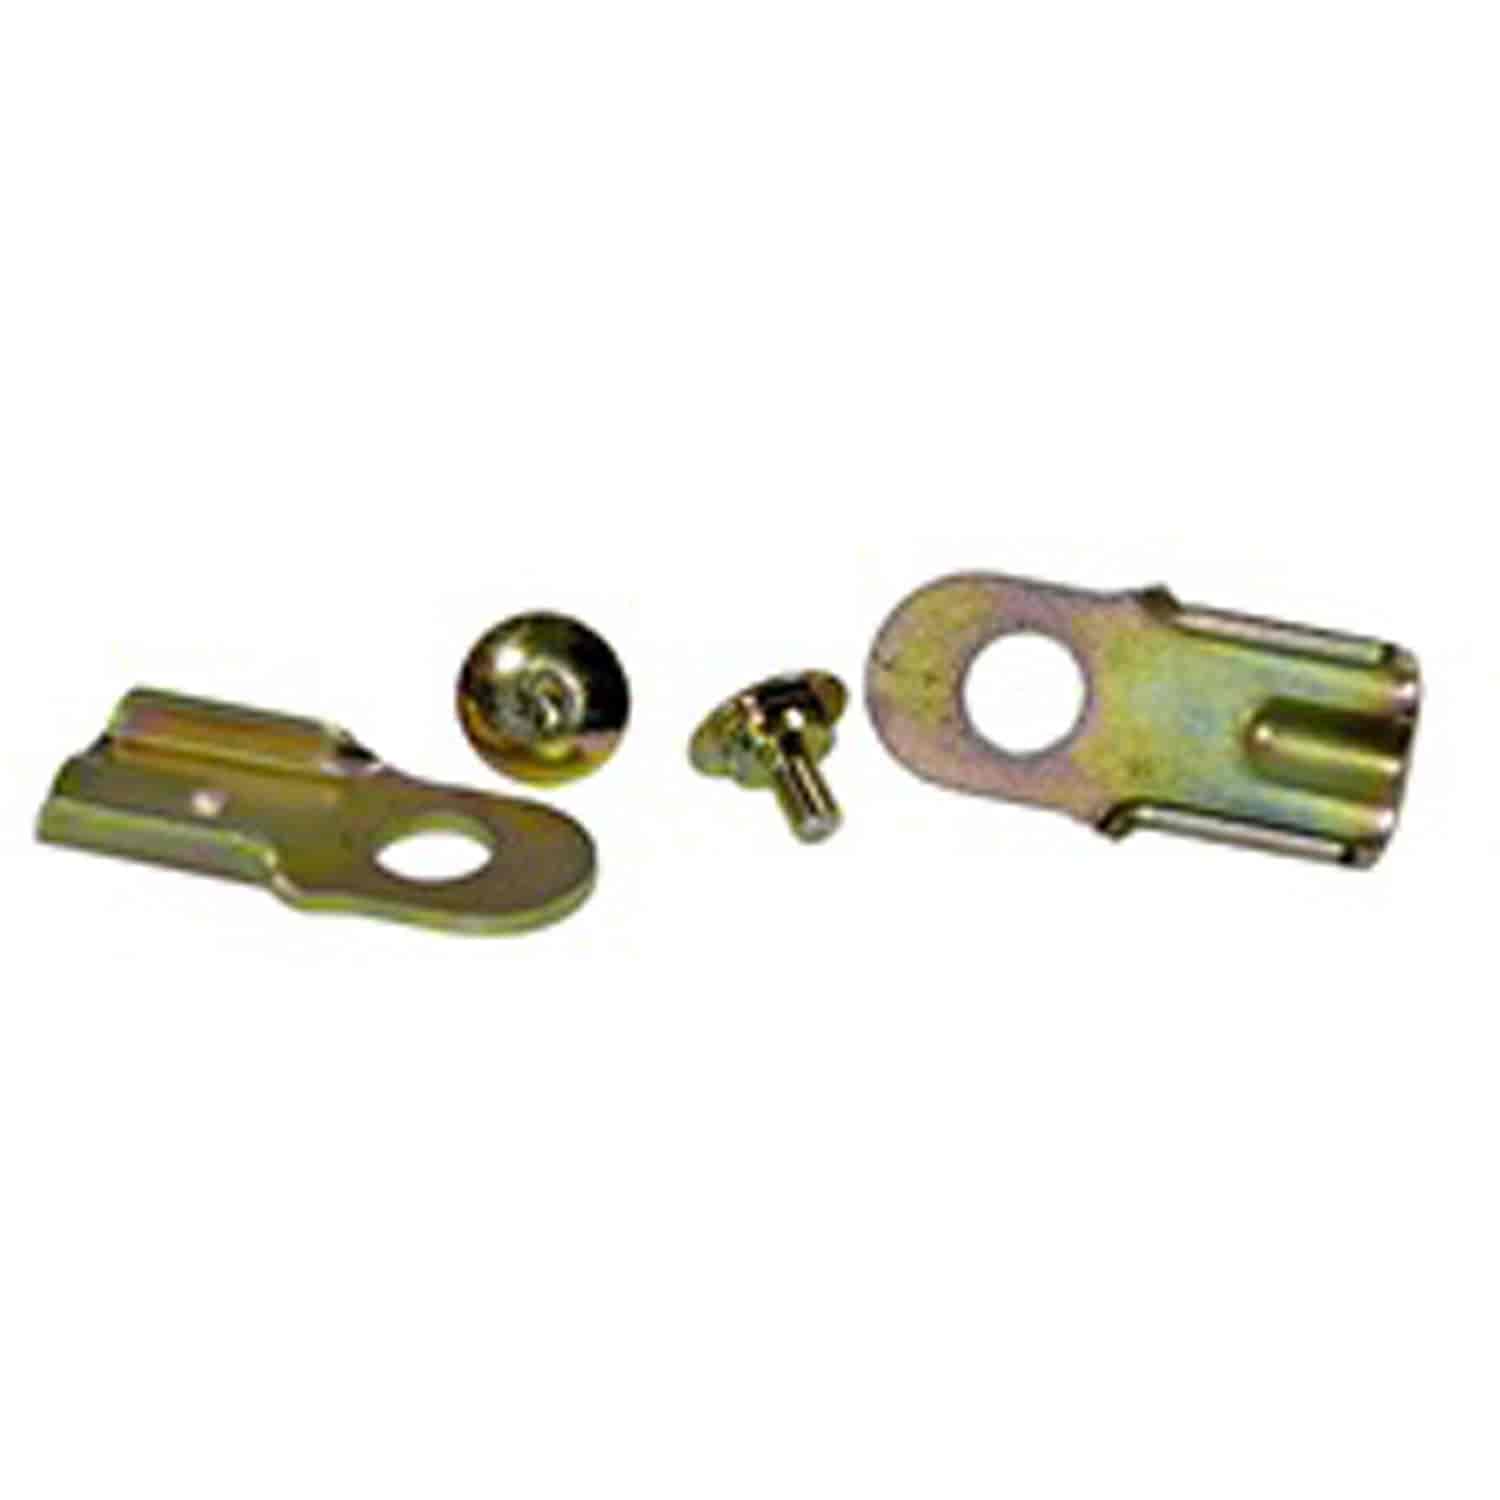 pair of replacement tailgate latch brackets from Omix-ADA fit 76-86 Jeep CJ7 and CJ8